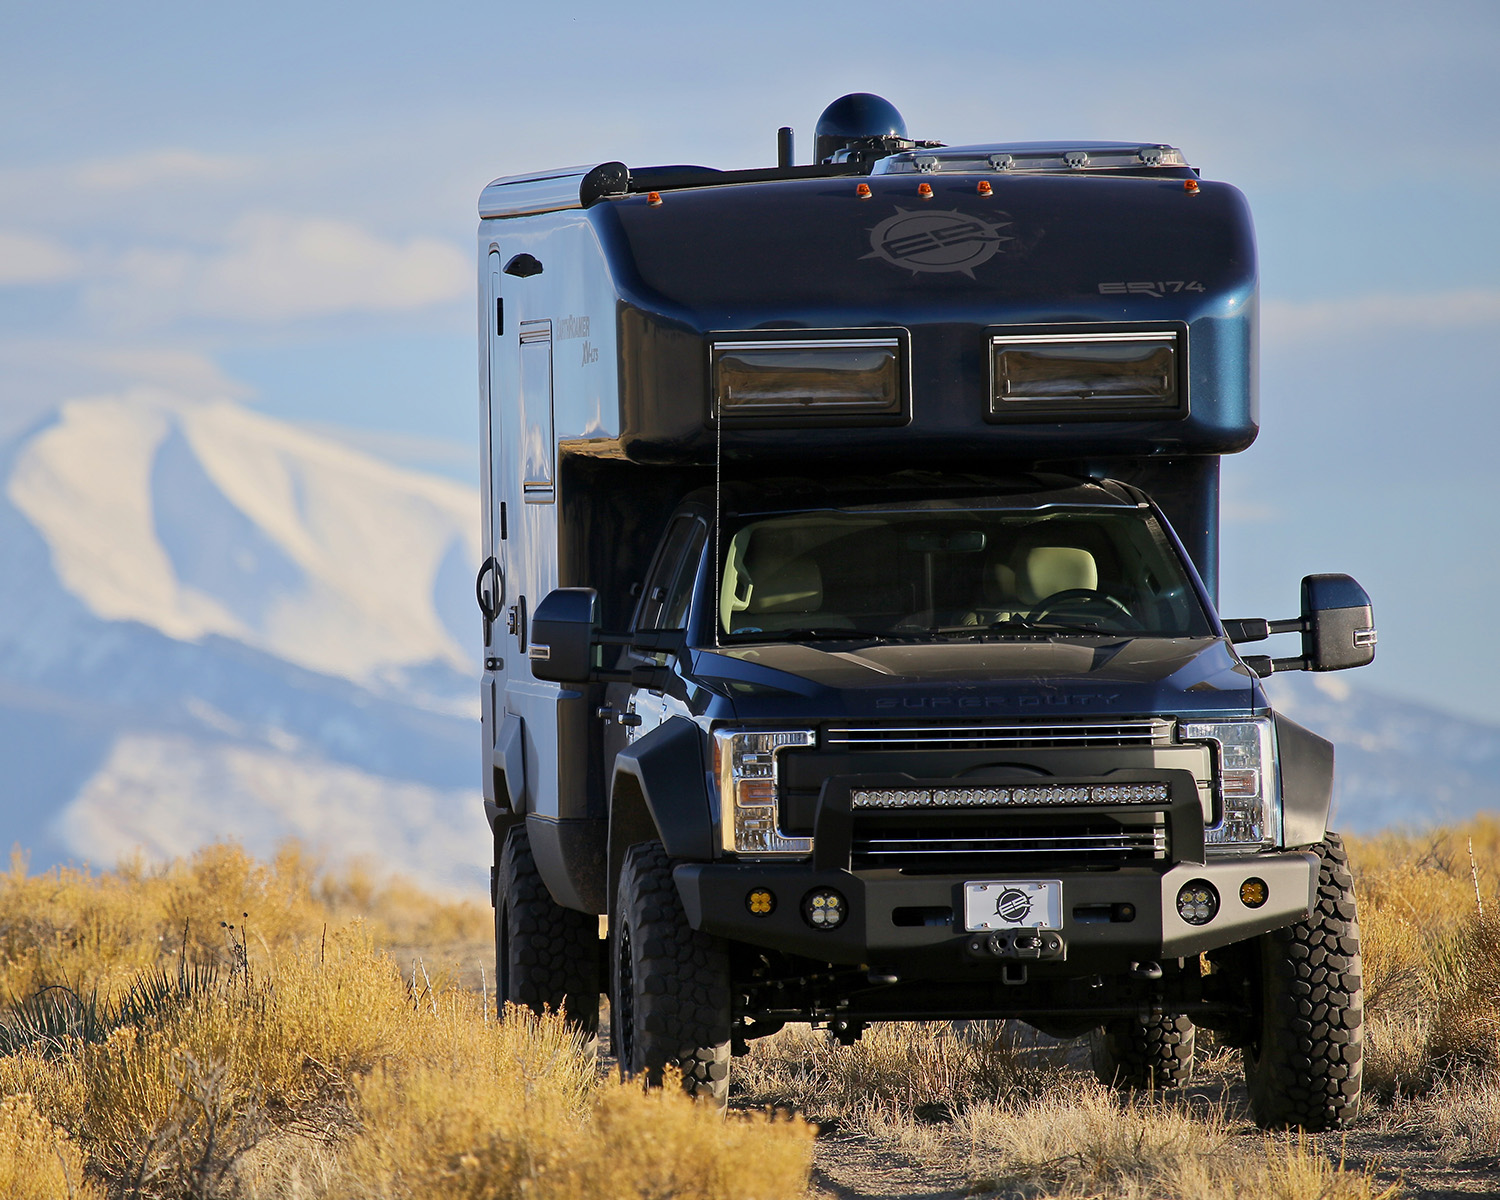 Lti Earthroamers Best Selling Expedition Vehicle 2022